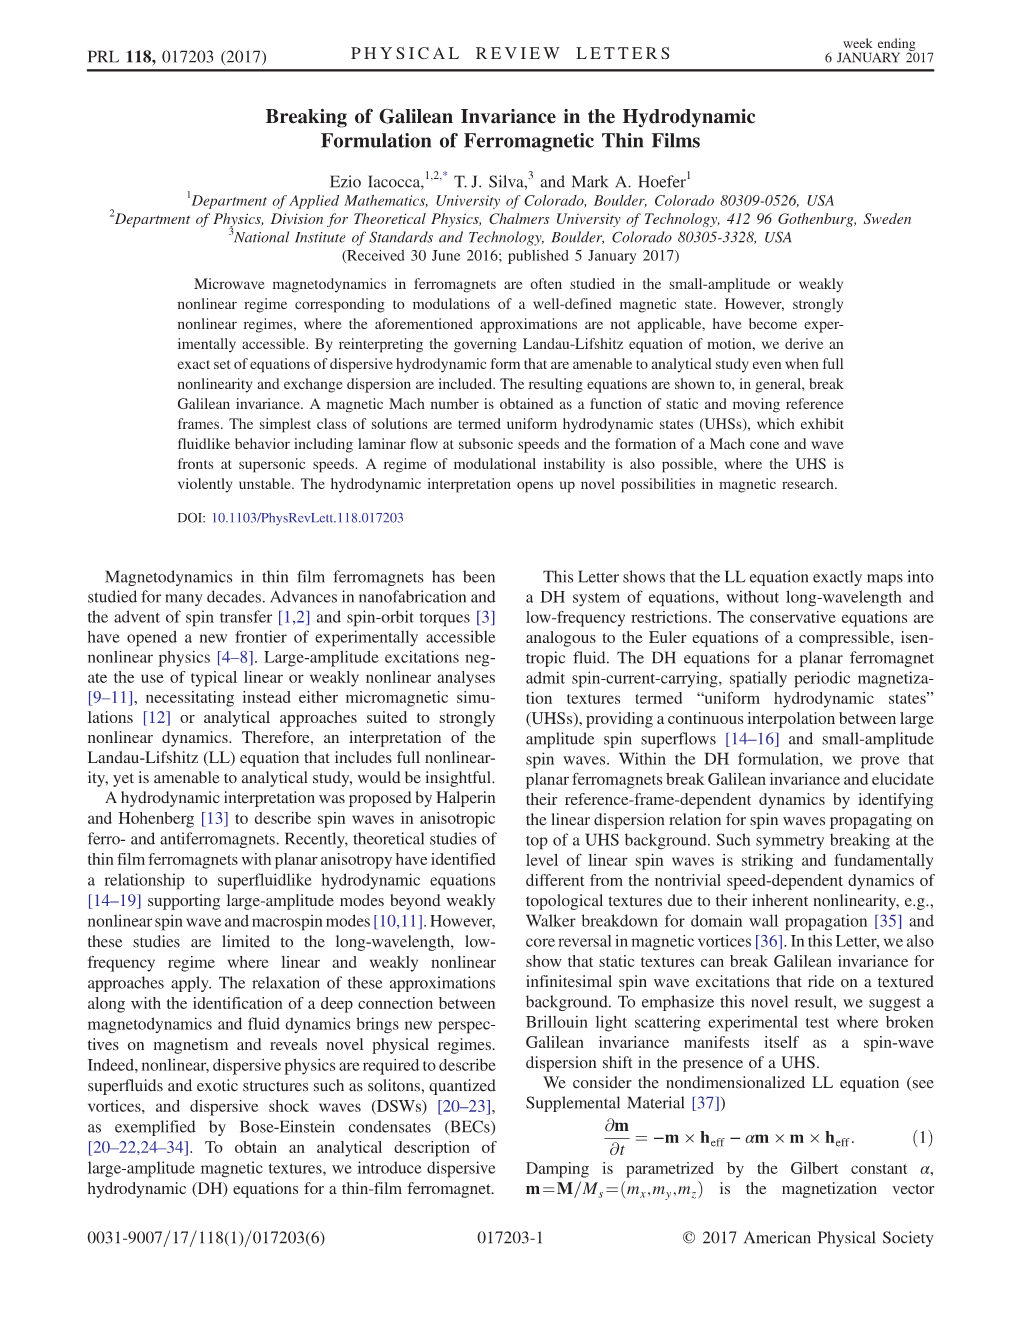 Breaking of Galilean Invariance in the Hydrodynamic Formulation of Ferromagnetic Thin Films